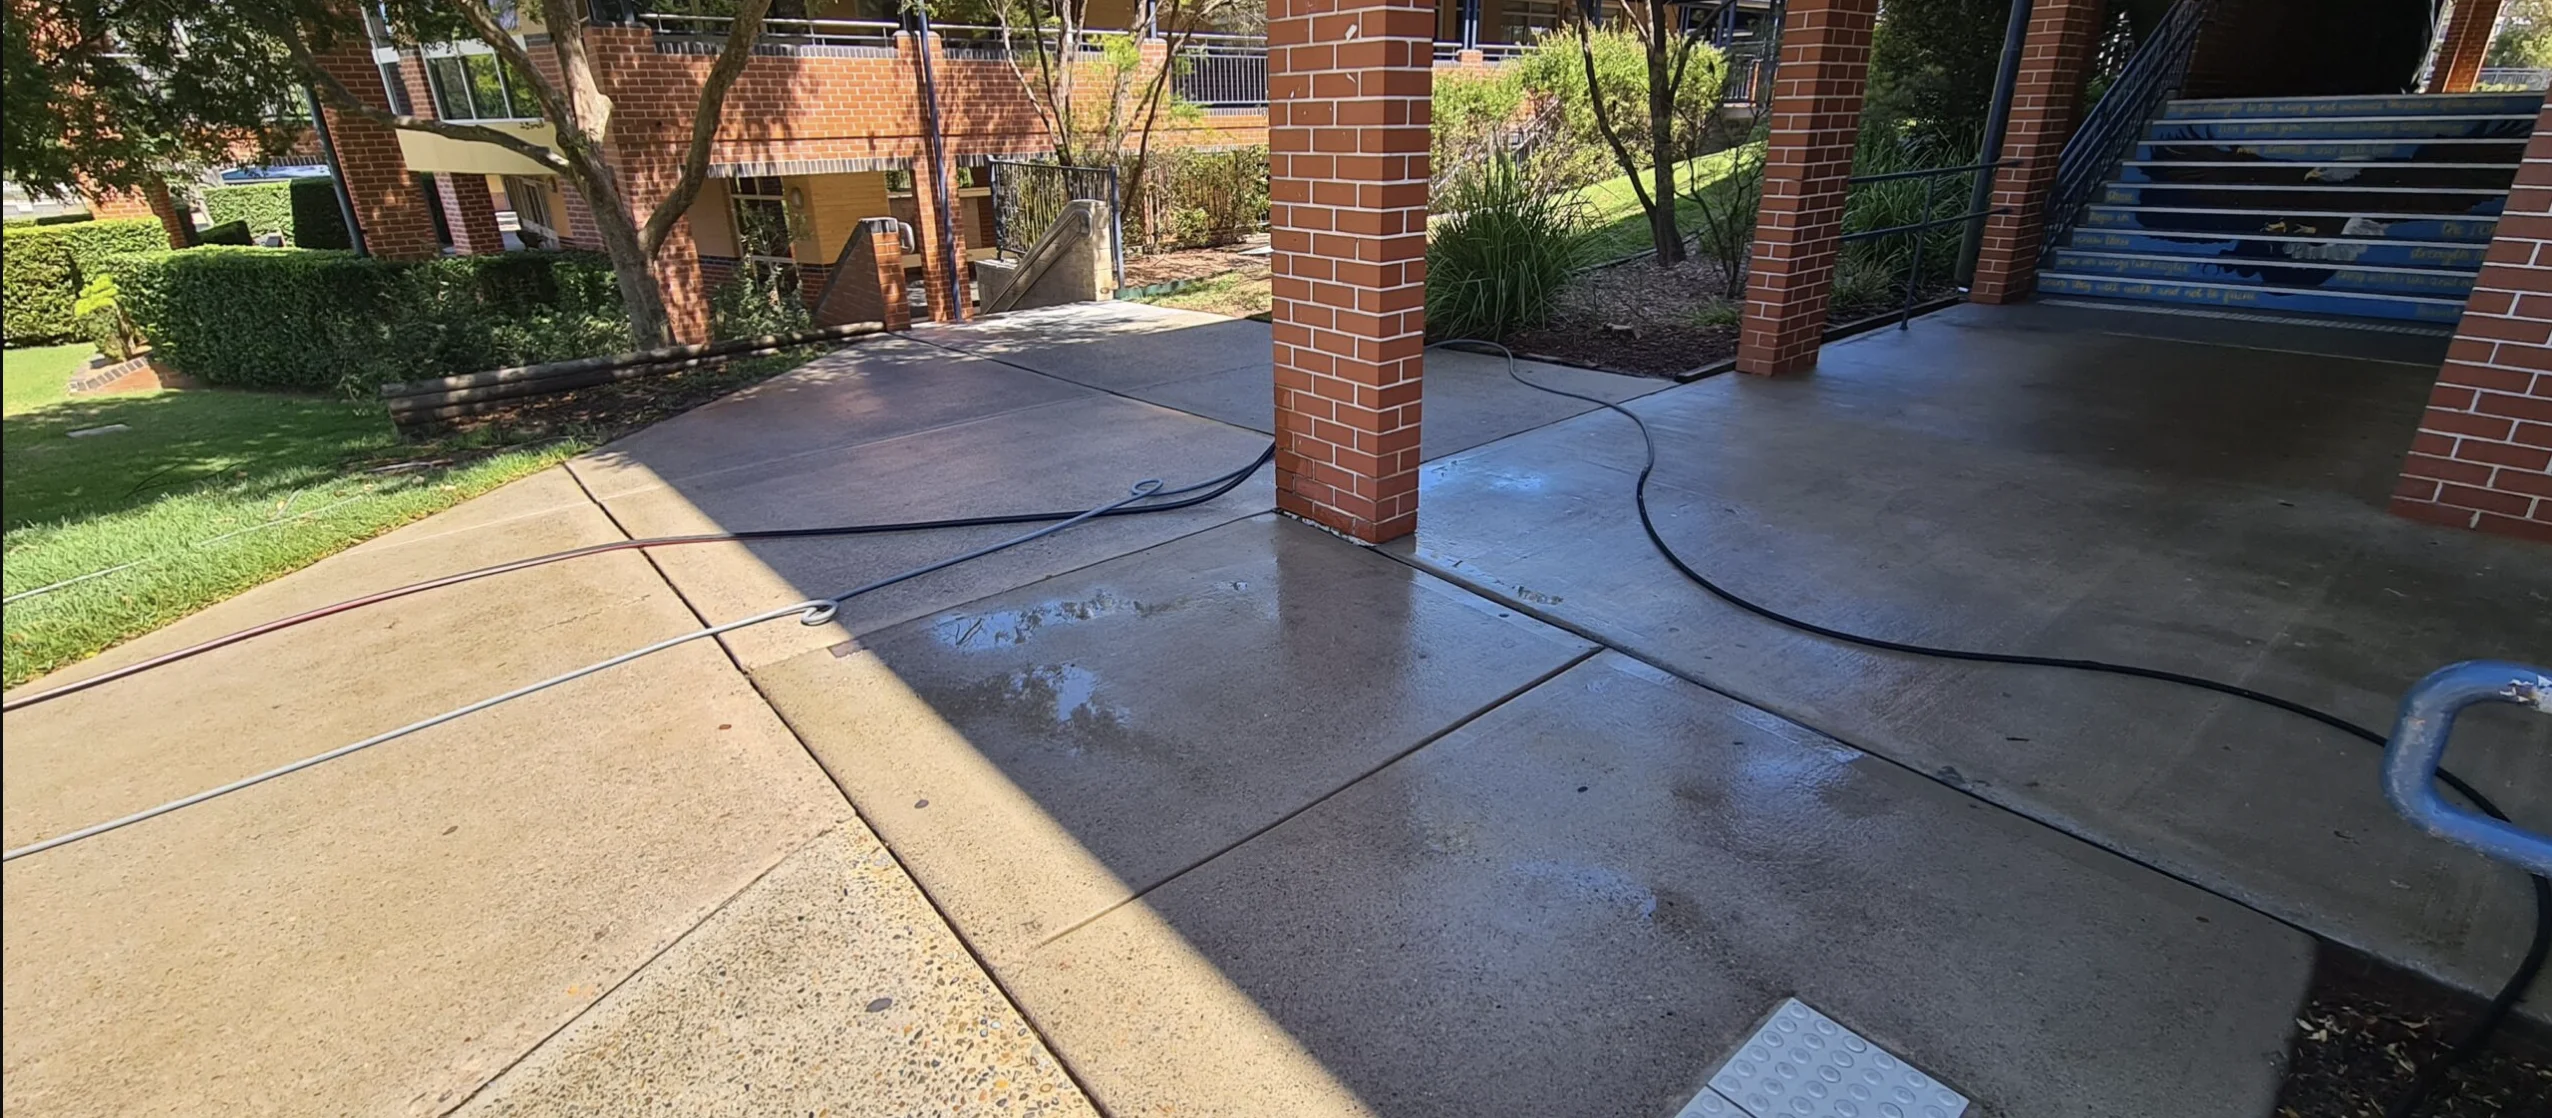 SCHOOLS AND AGED CARE pressure cleaning and washing services in Sydney and surrounding areas.